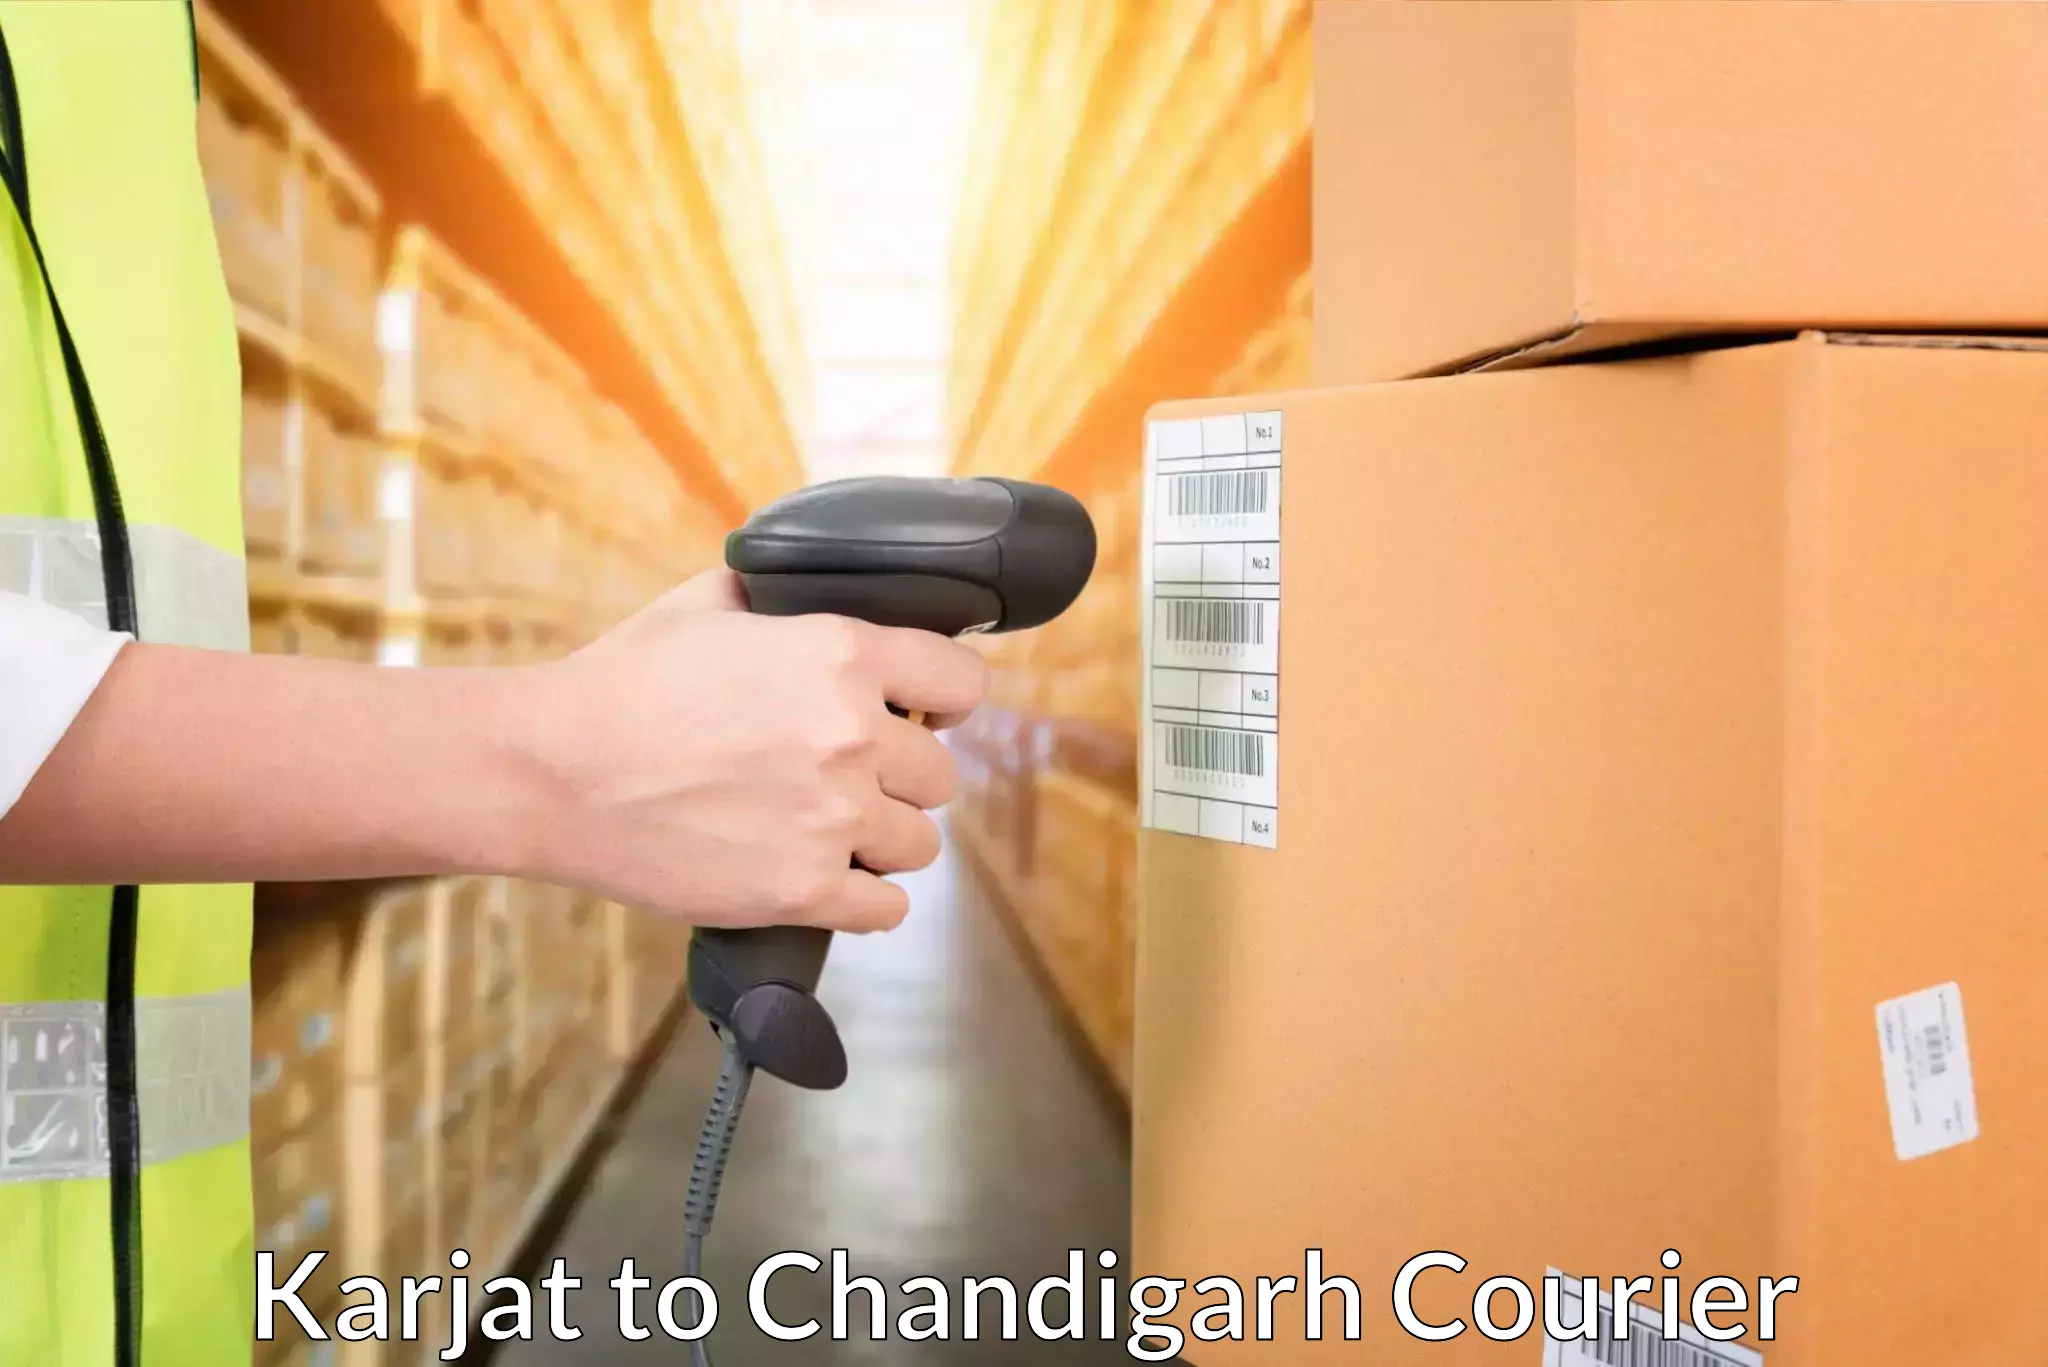 On-call courier service Karjat to Chandigarh